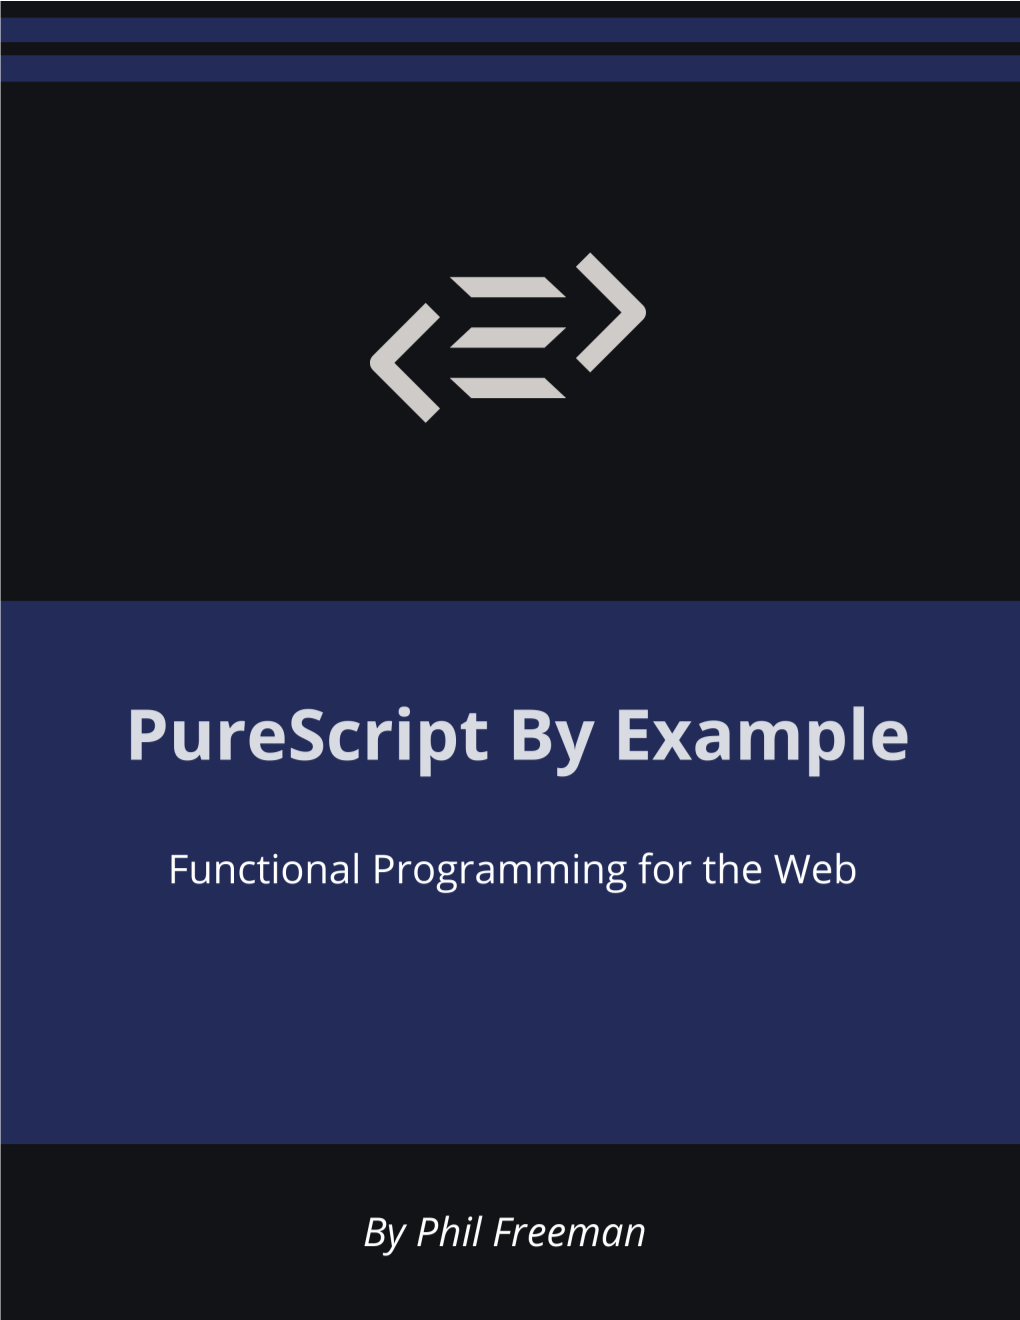 Purescript by Example Functional Programming for the Web